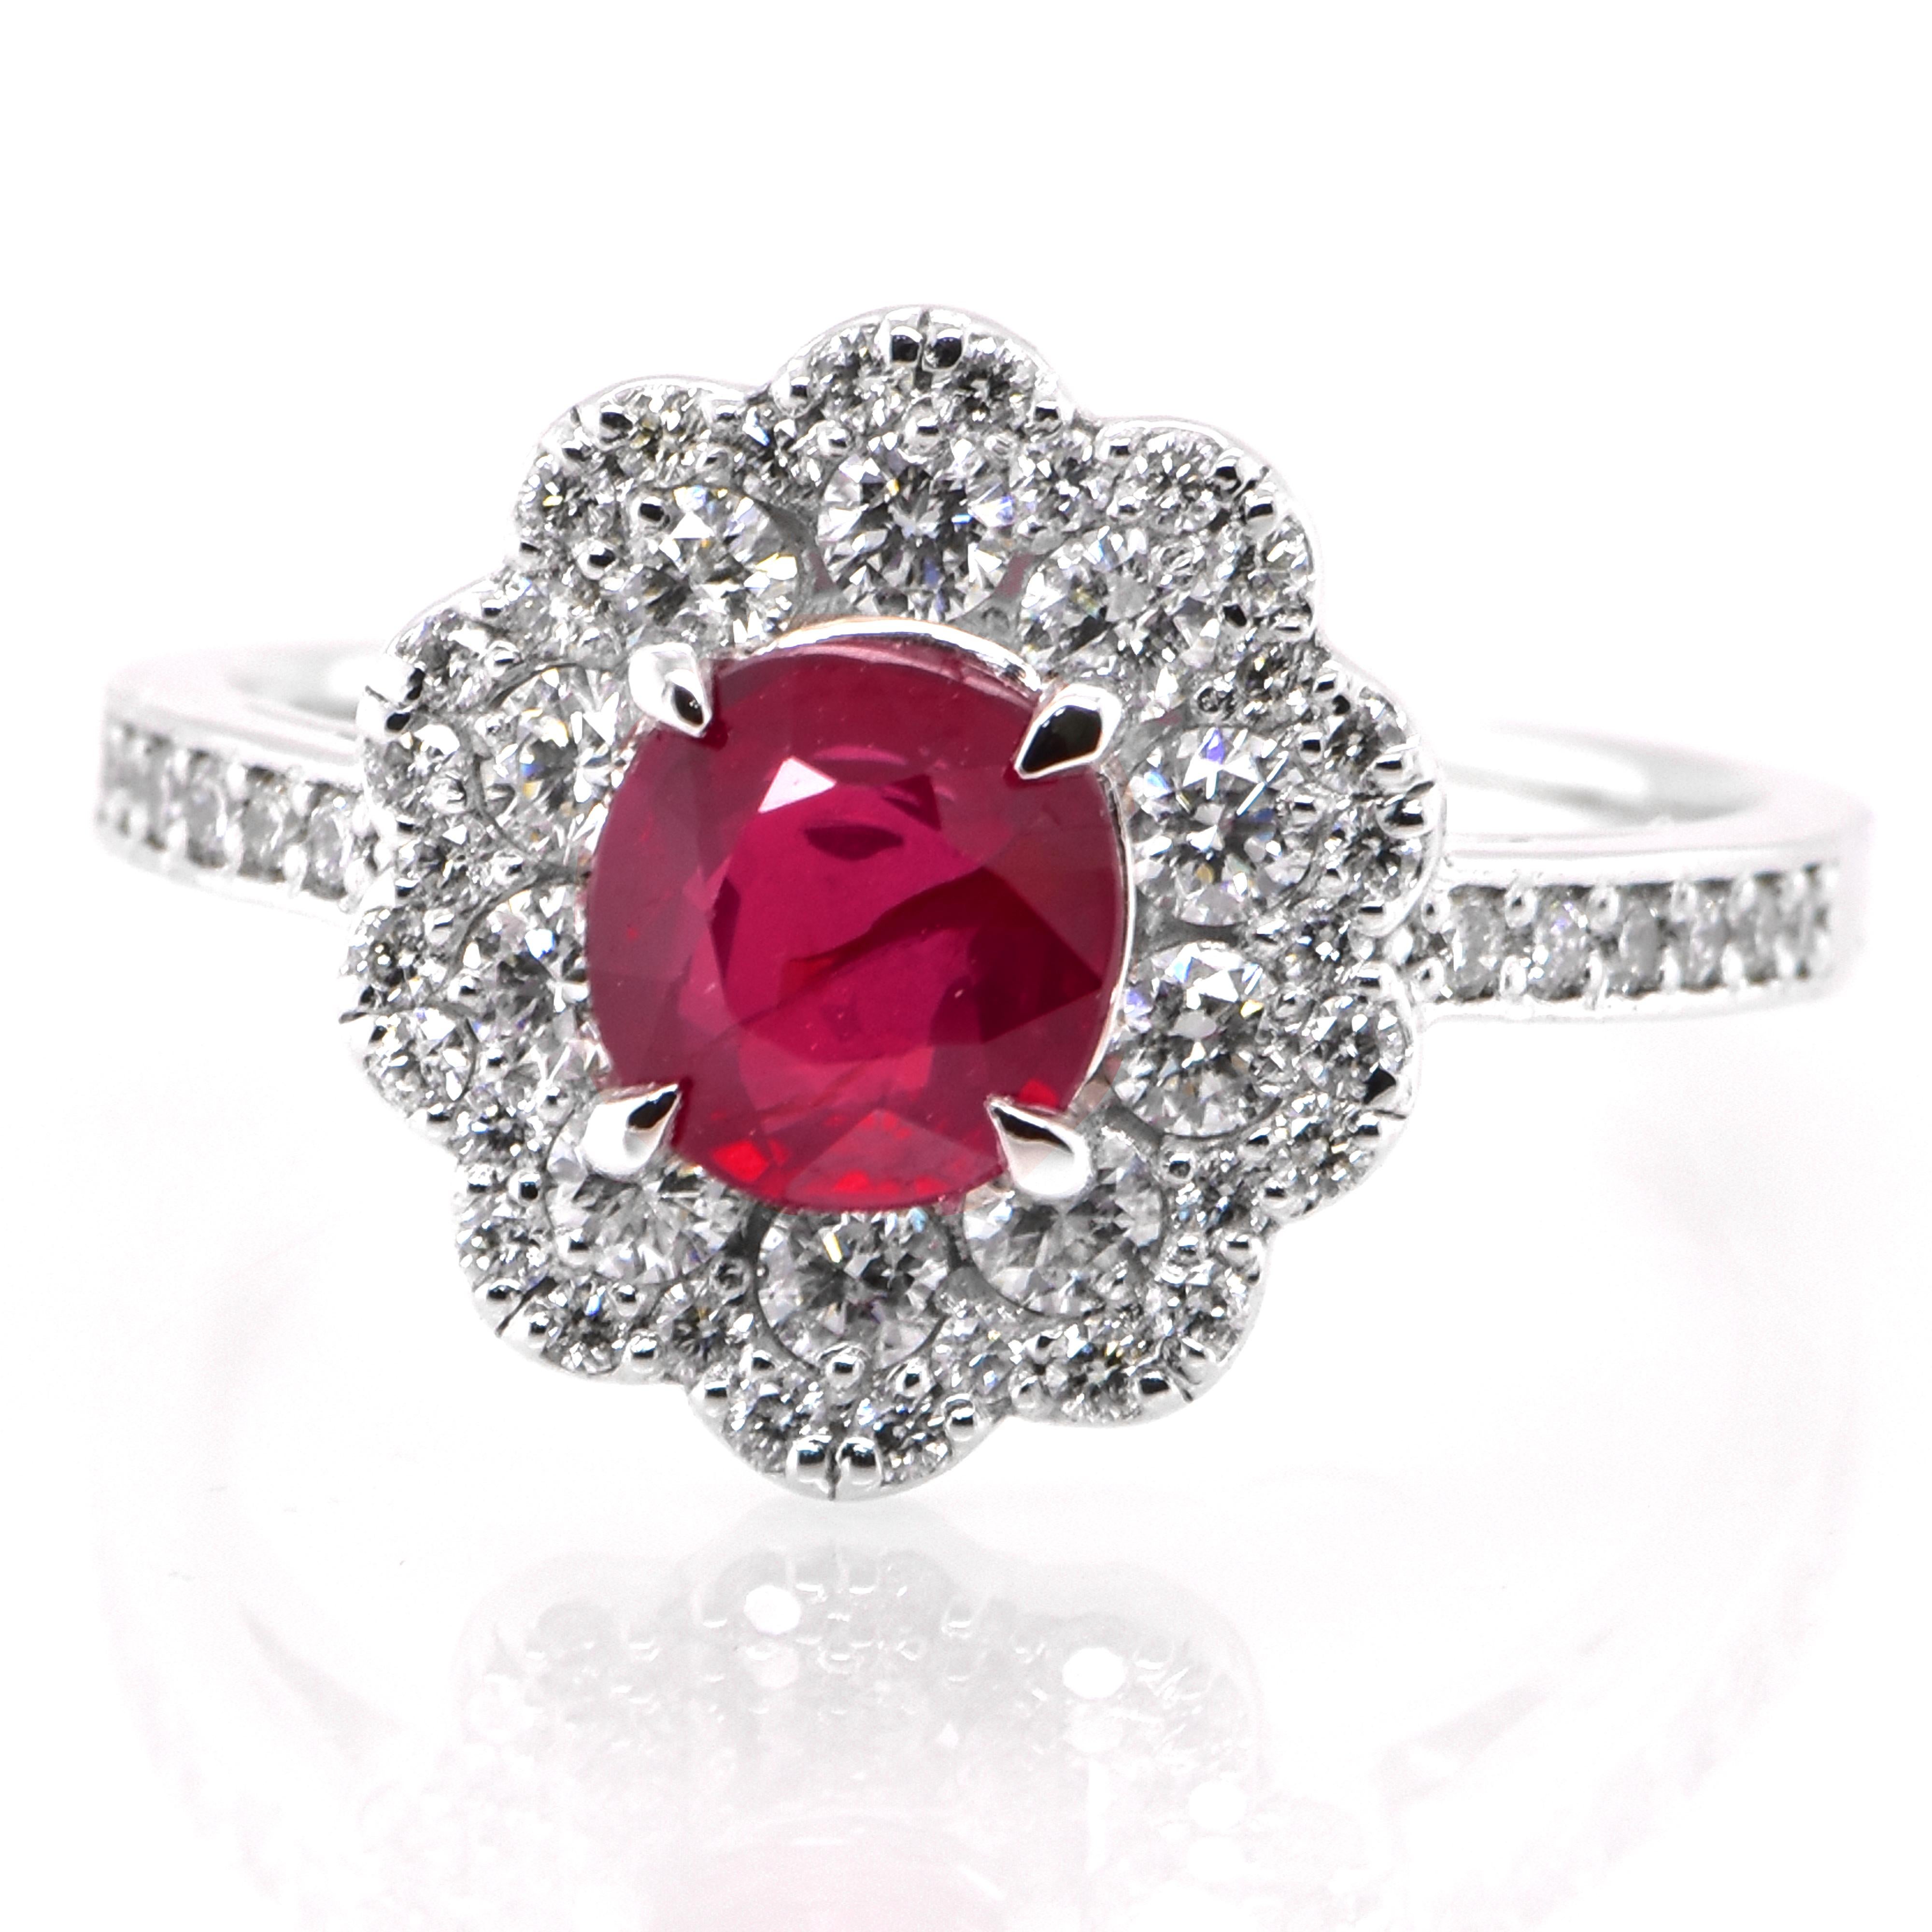 A beautiful Ring set in Platinum featuring a GIA Certified 1.14 Carat Natural Untreated (Unheated) Ruby and 0.61 Carat Diamonds. Rubies are referred to as 